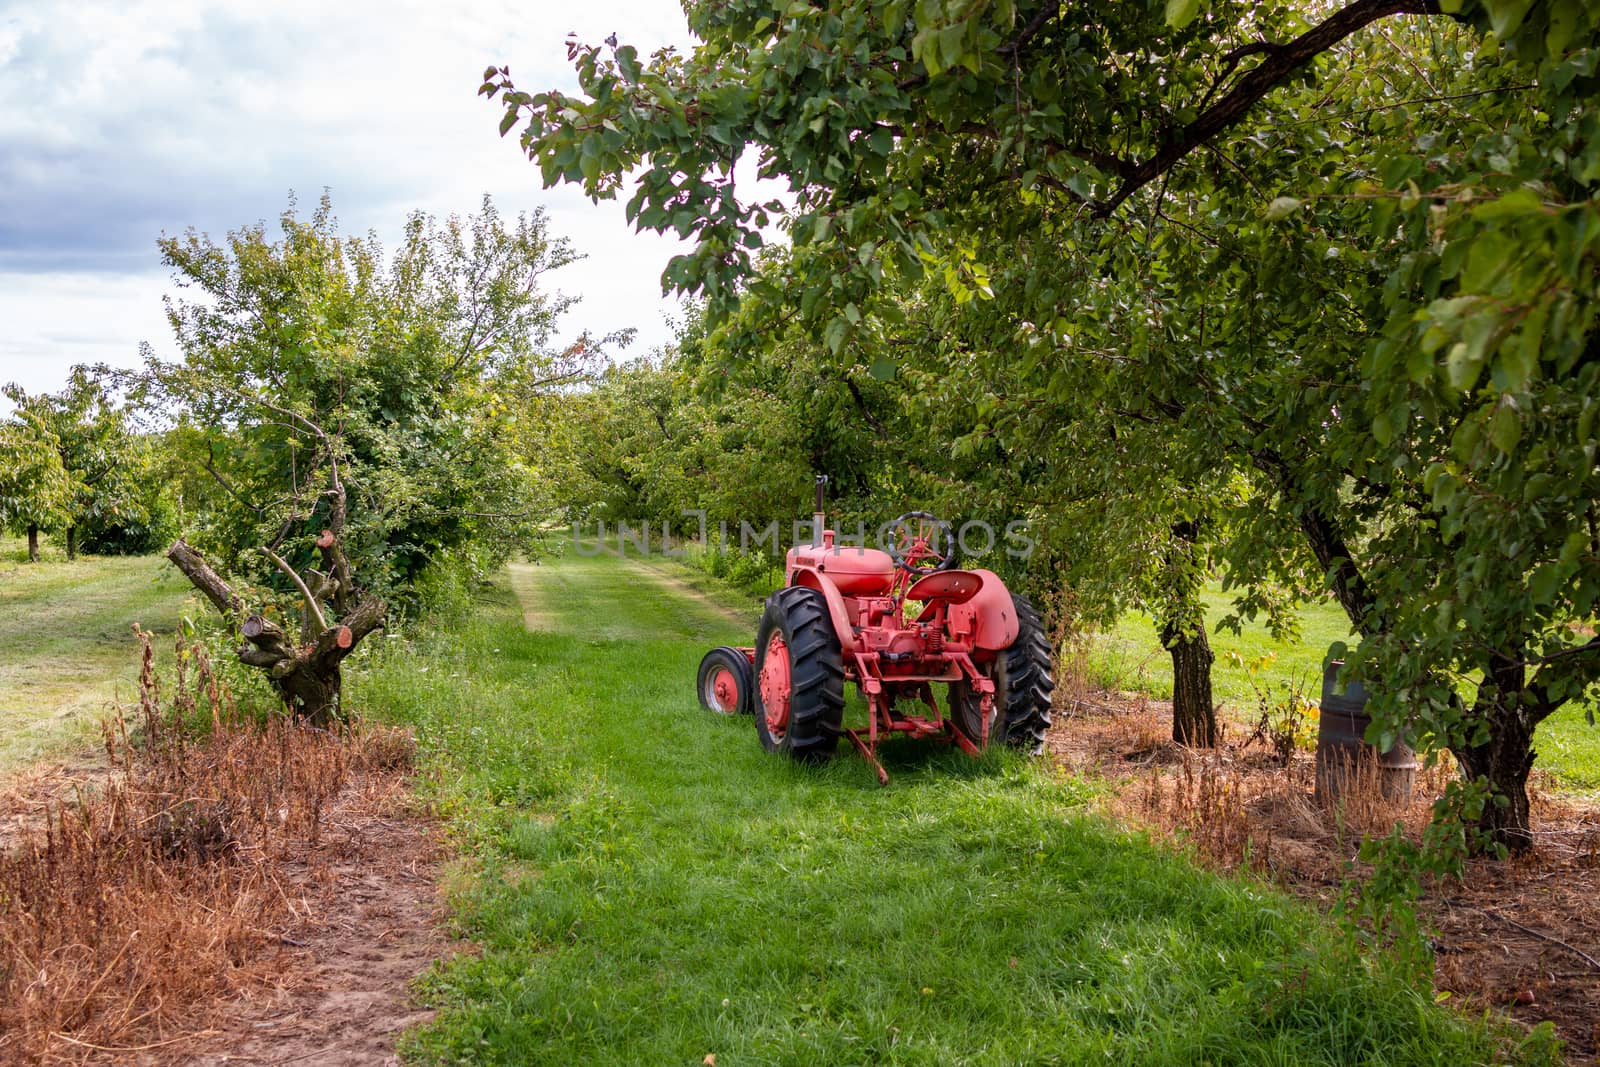 Antique Tractor and orchard. An antique farm tractor sits amidst an orchard of blossoming apple trees.